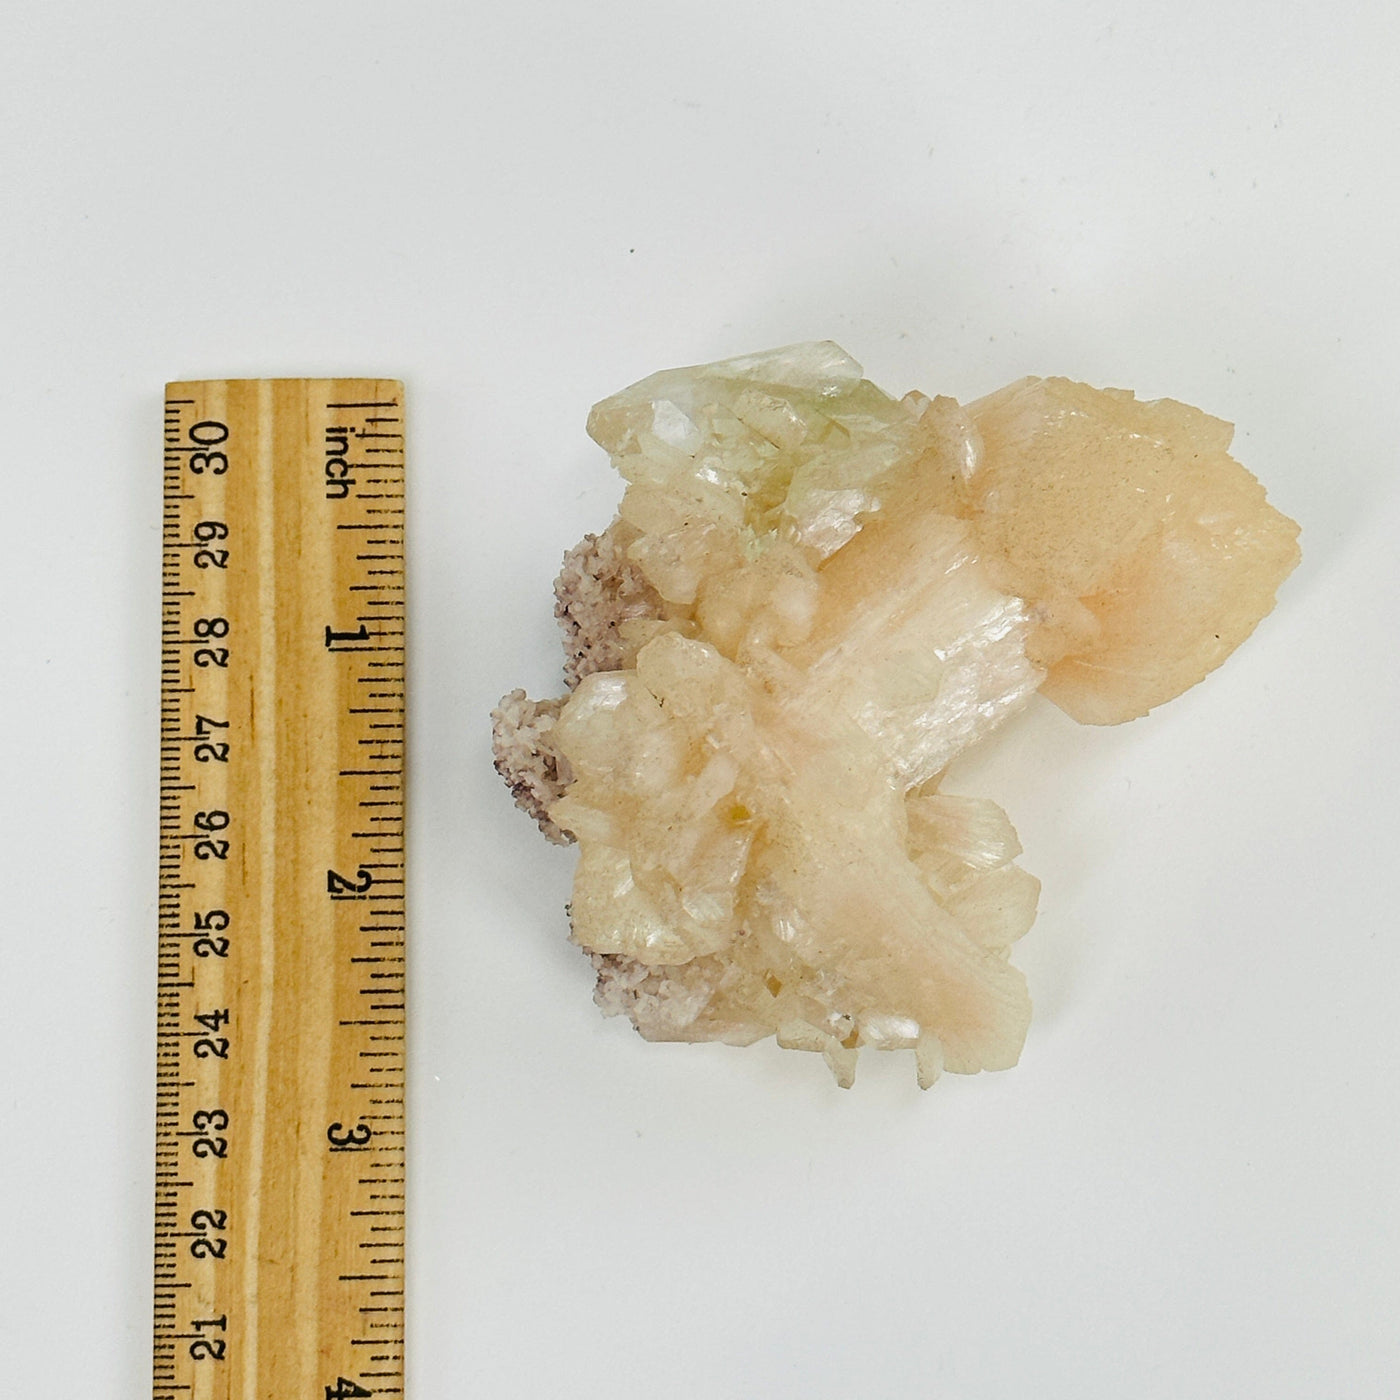 apophyllite with calcite next to a ruler for size reference